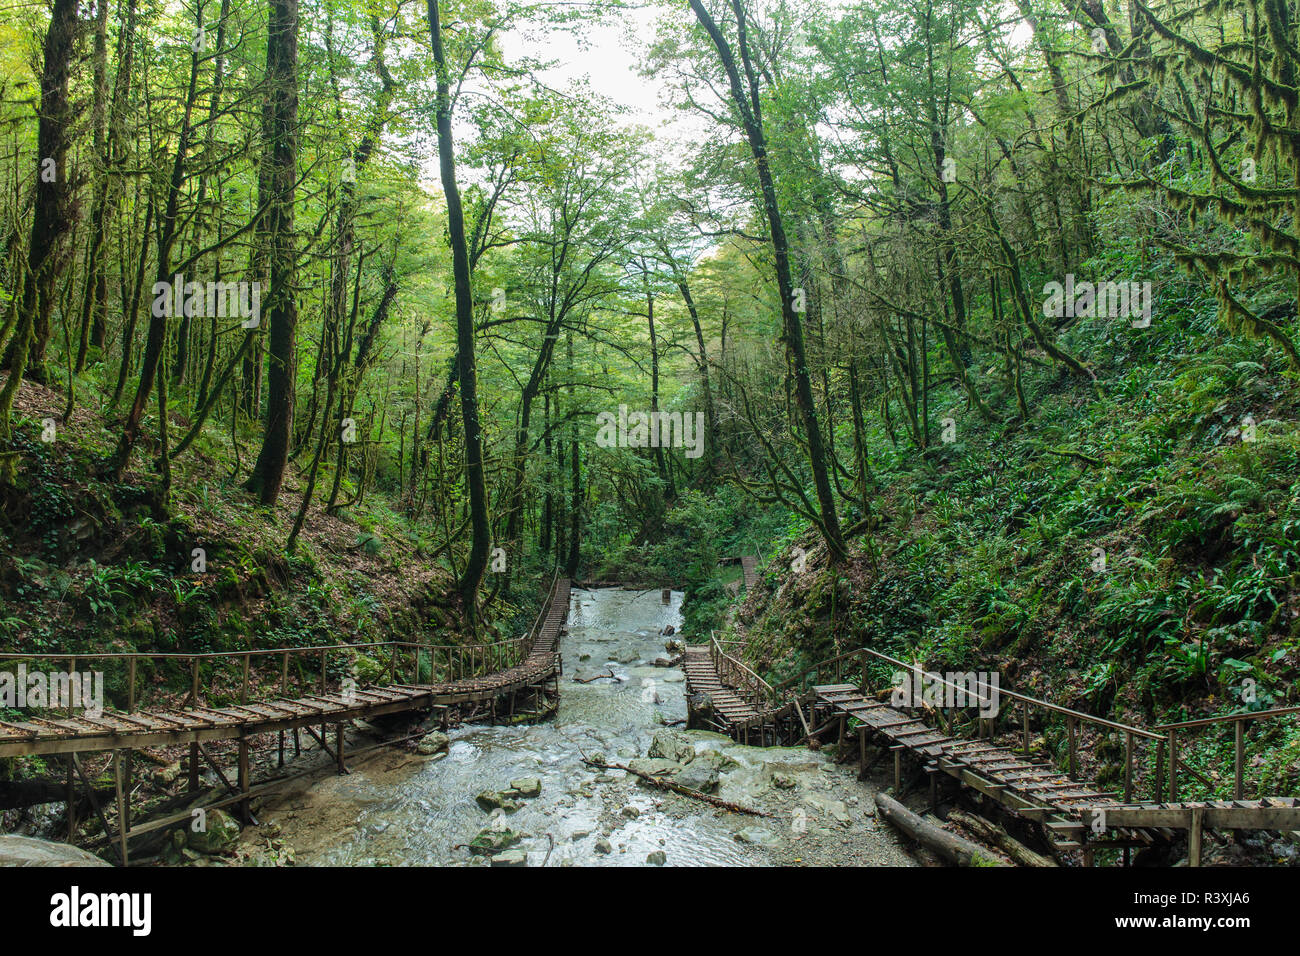 A Forrest symbiosis - symmetrical view of a Forrest full of waterfalls Stock Photo